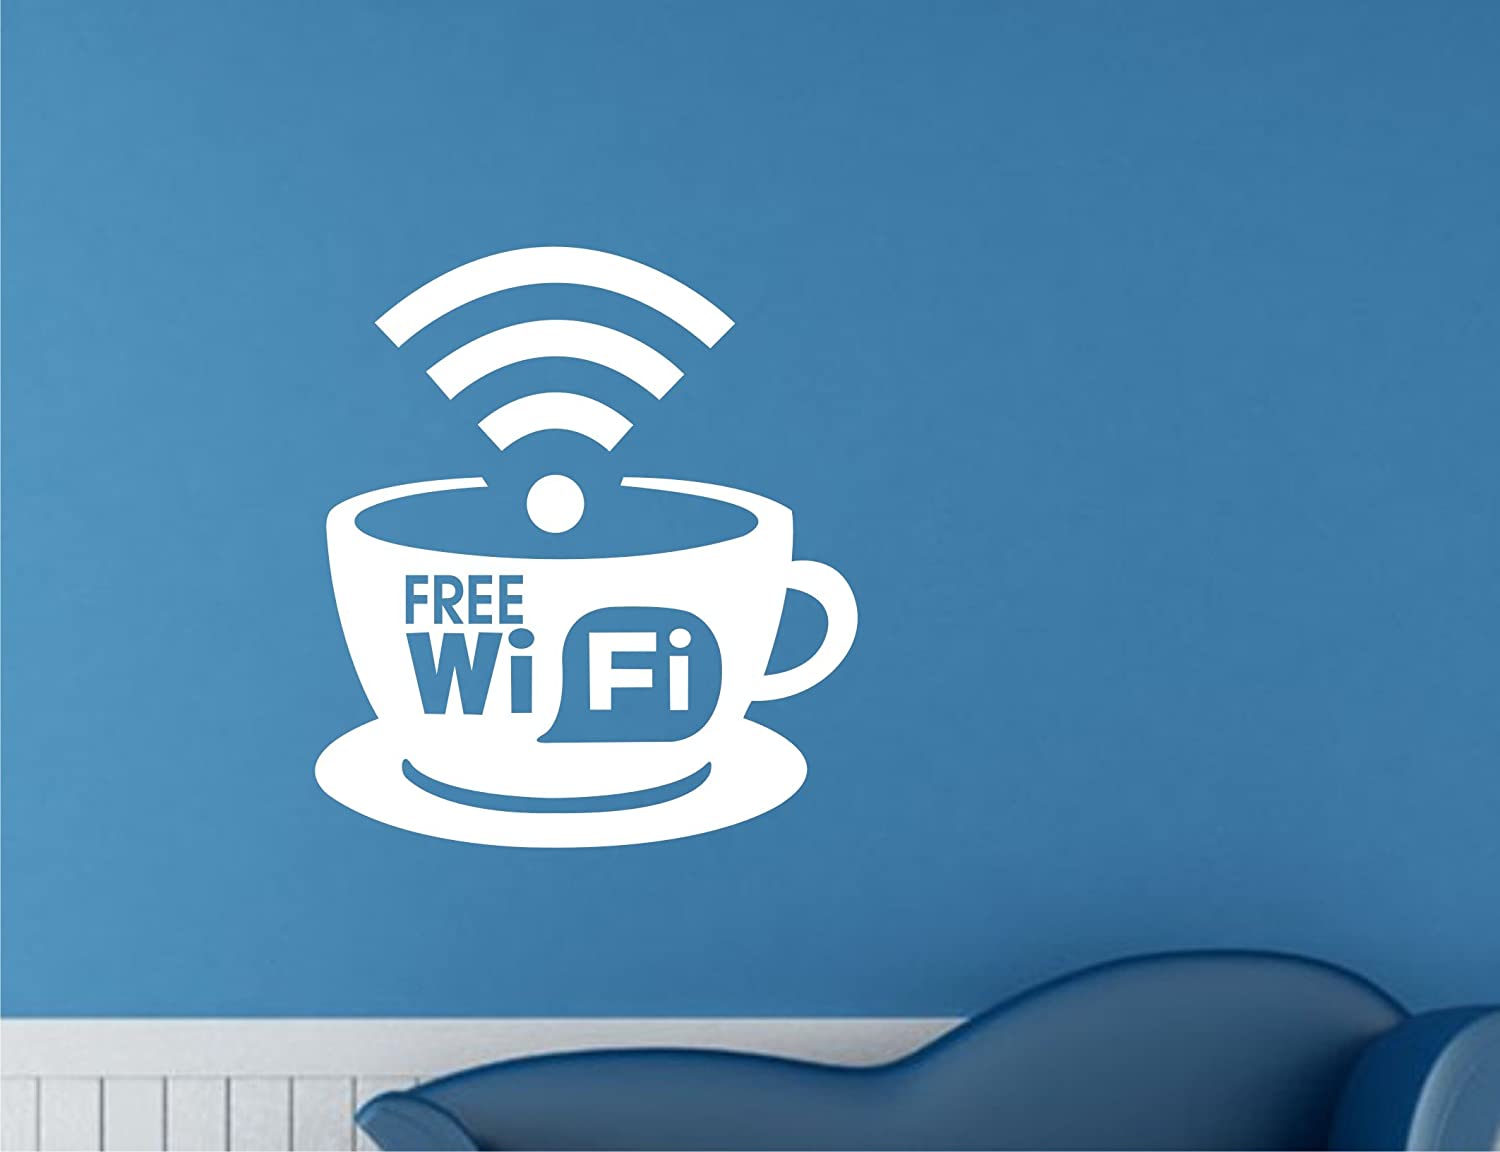 Buy Coffee Mug with WiFi Network White Wall Sticker and Wallpaper Size(59 * 65) cm Online at Low Prices in India